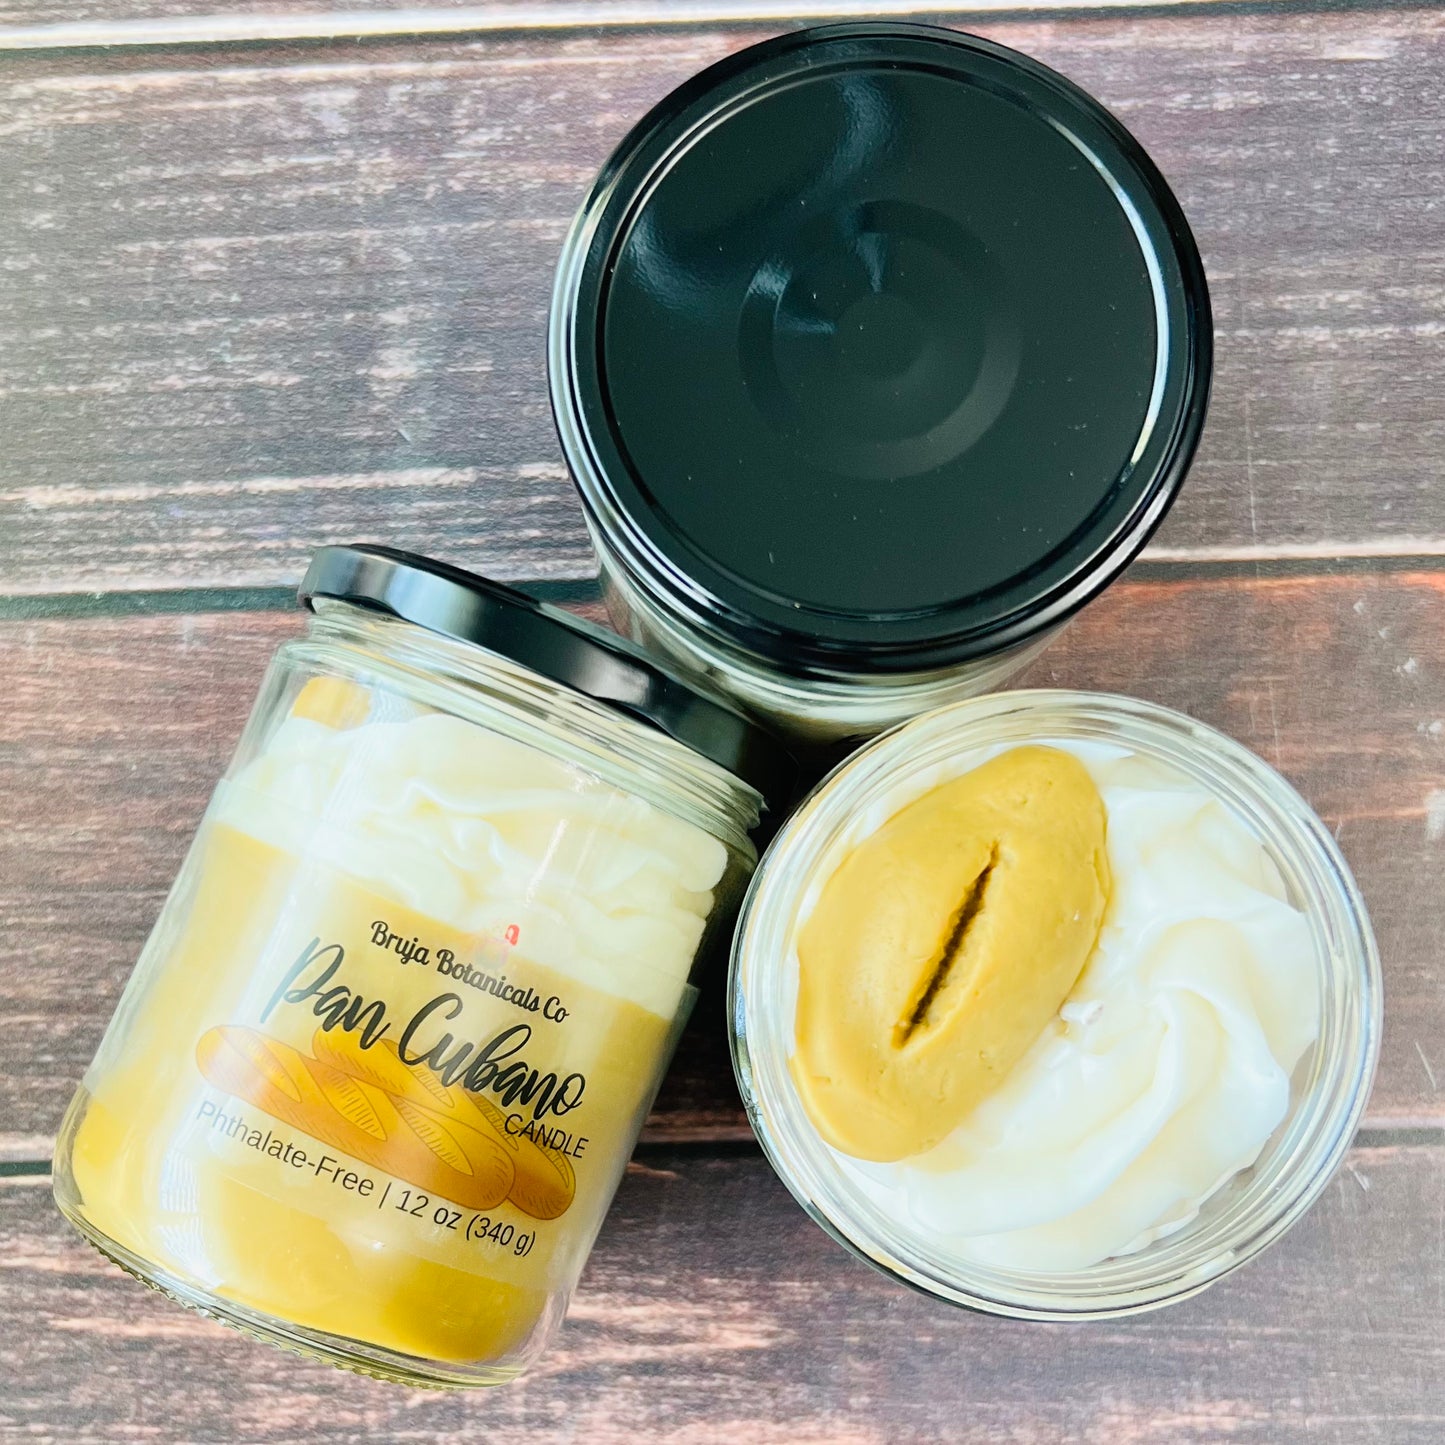 Pan Cubano Whipped Candle